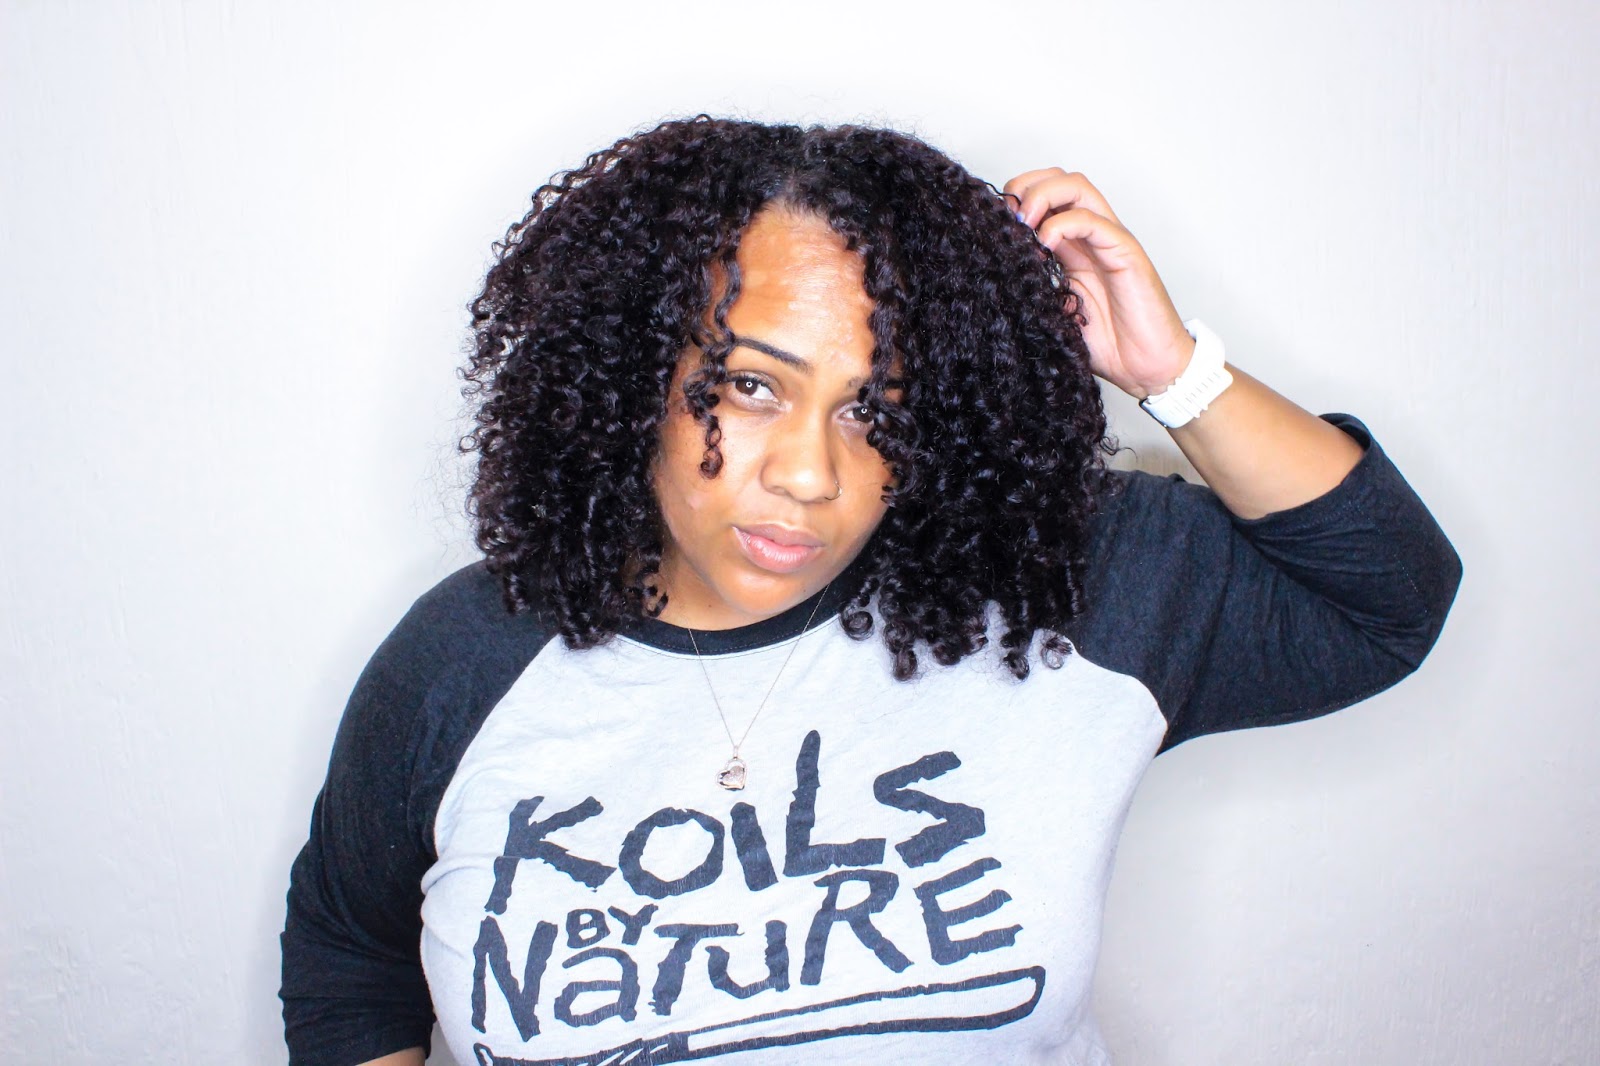 The Best Regimen to Fix Dry, Frizzy, Low Porosity Hair featuring Koils By  Nature | The Mane Objective